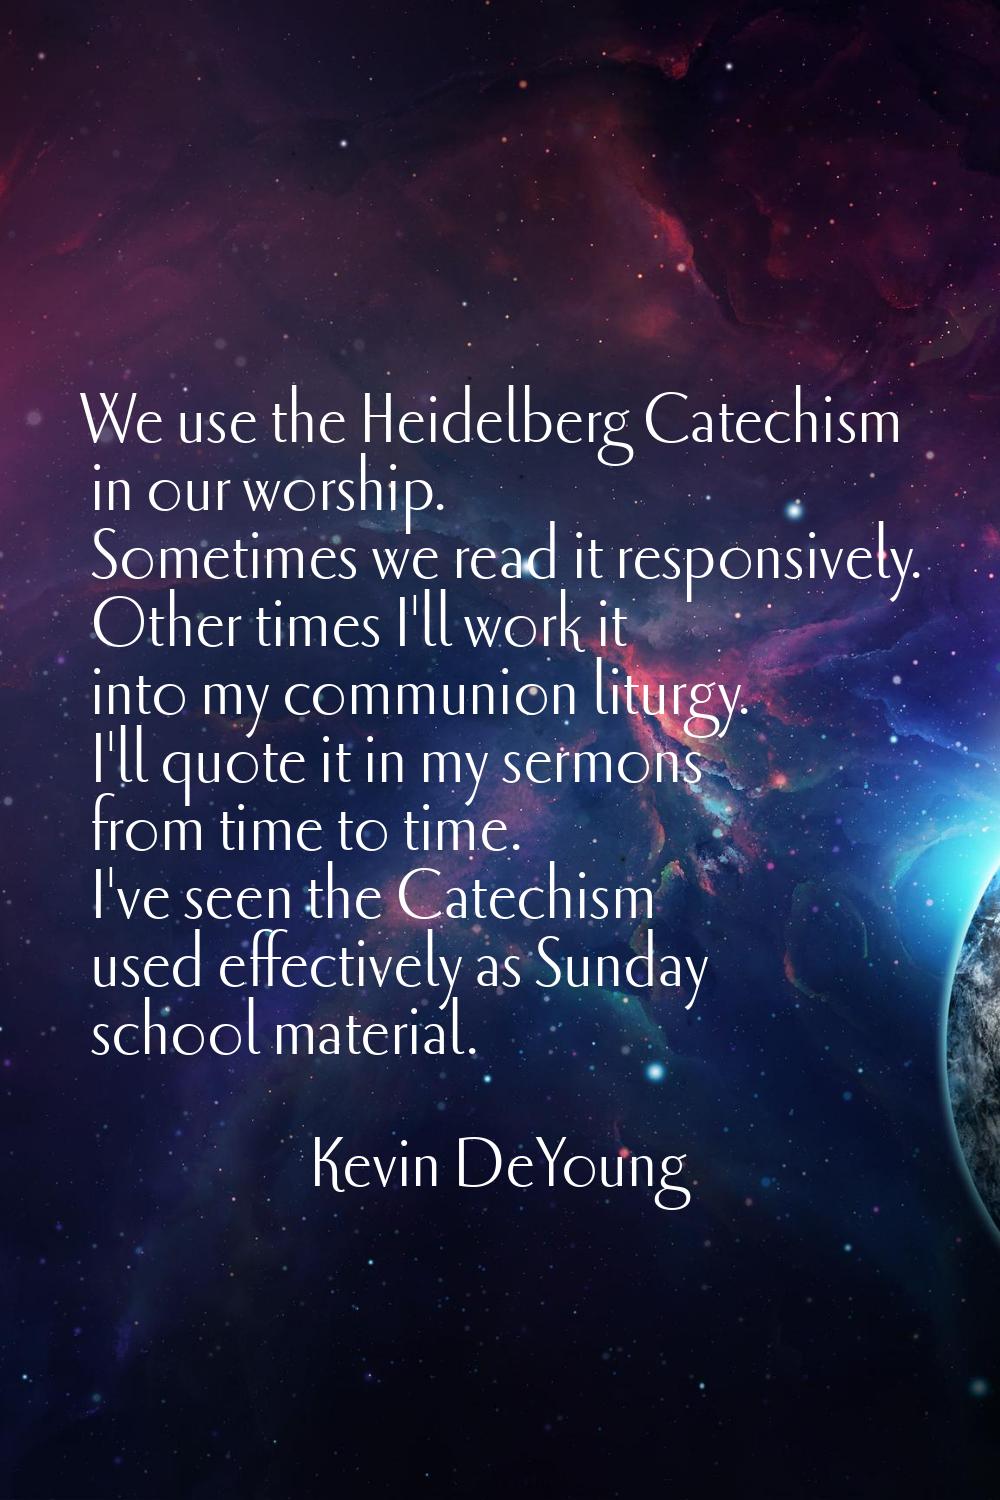 We use the Heidelberg Catechism in our worship. Sometimes we read it responsively. Other times I'll